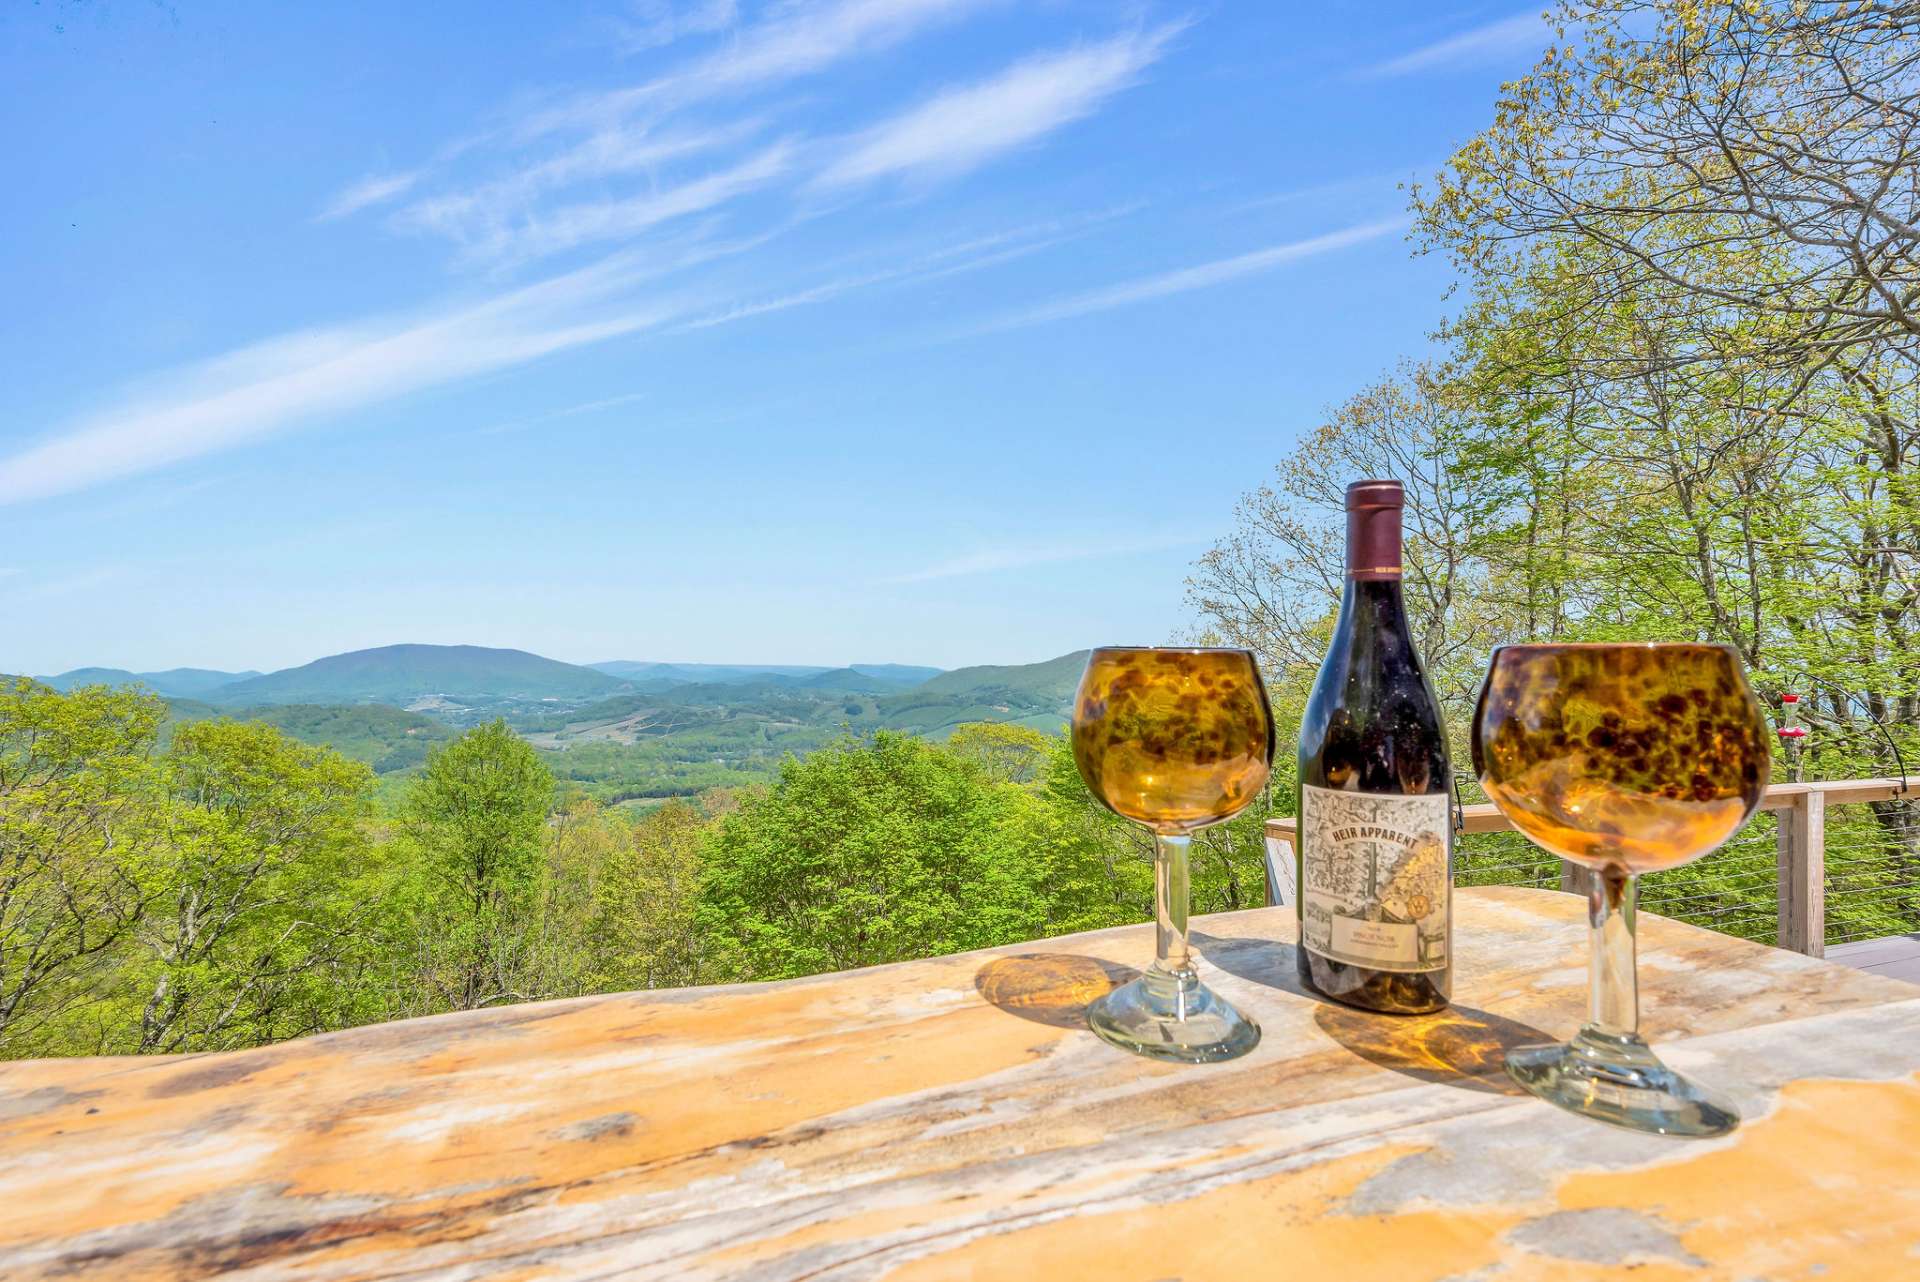 Cheers to living in mountain luxury.